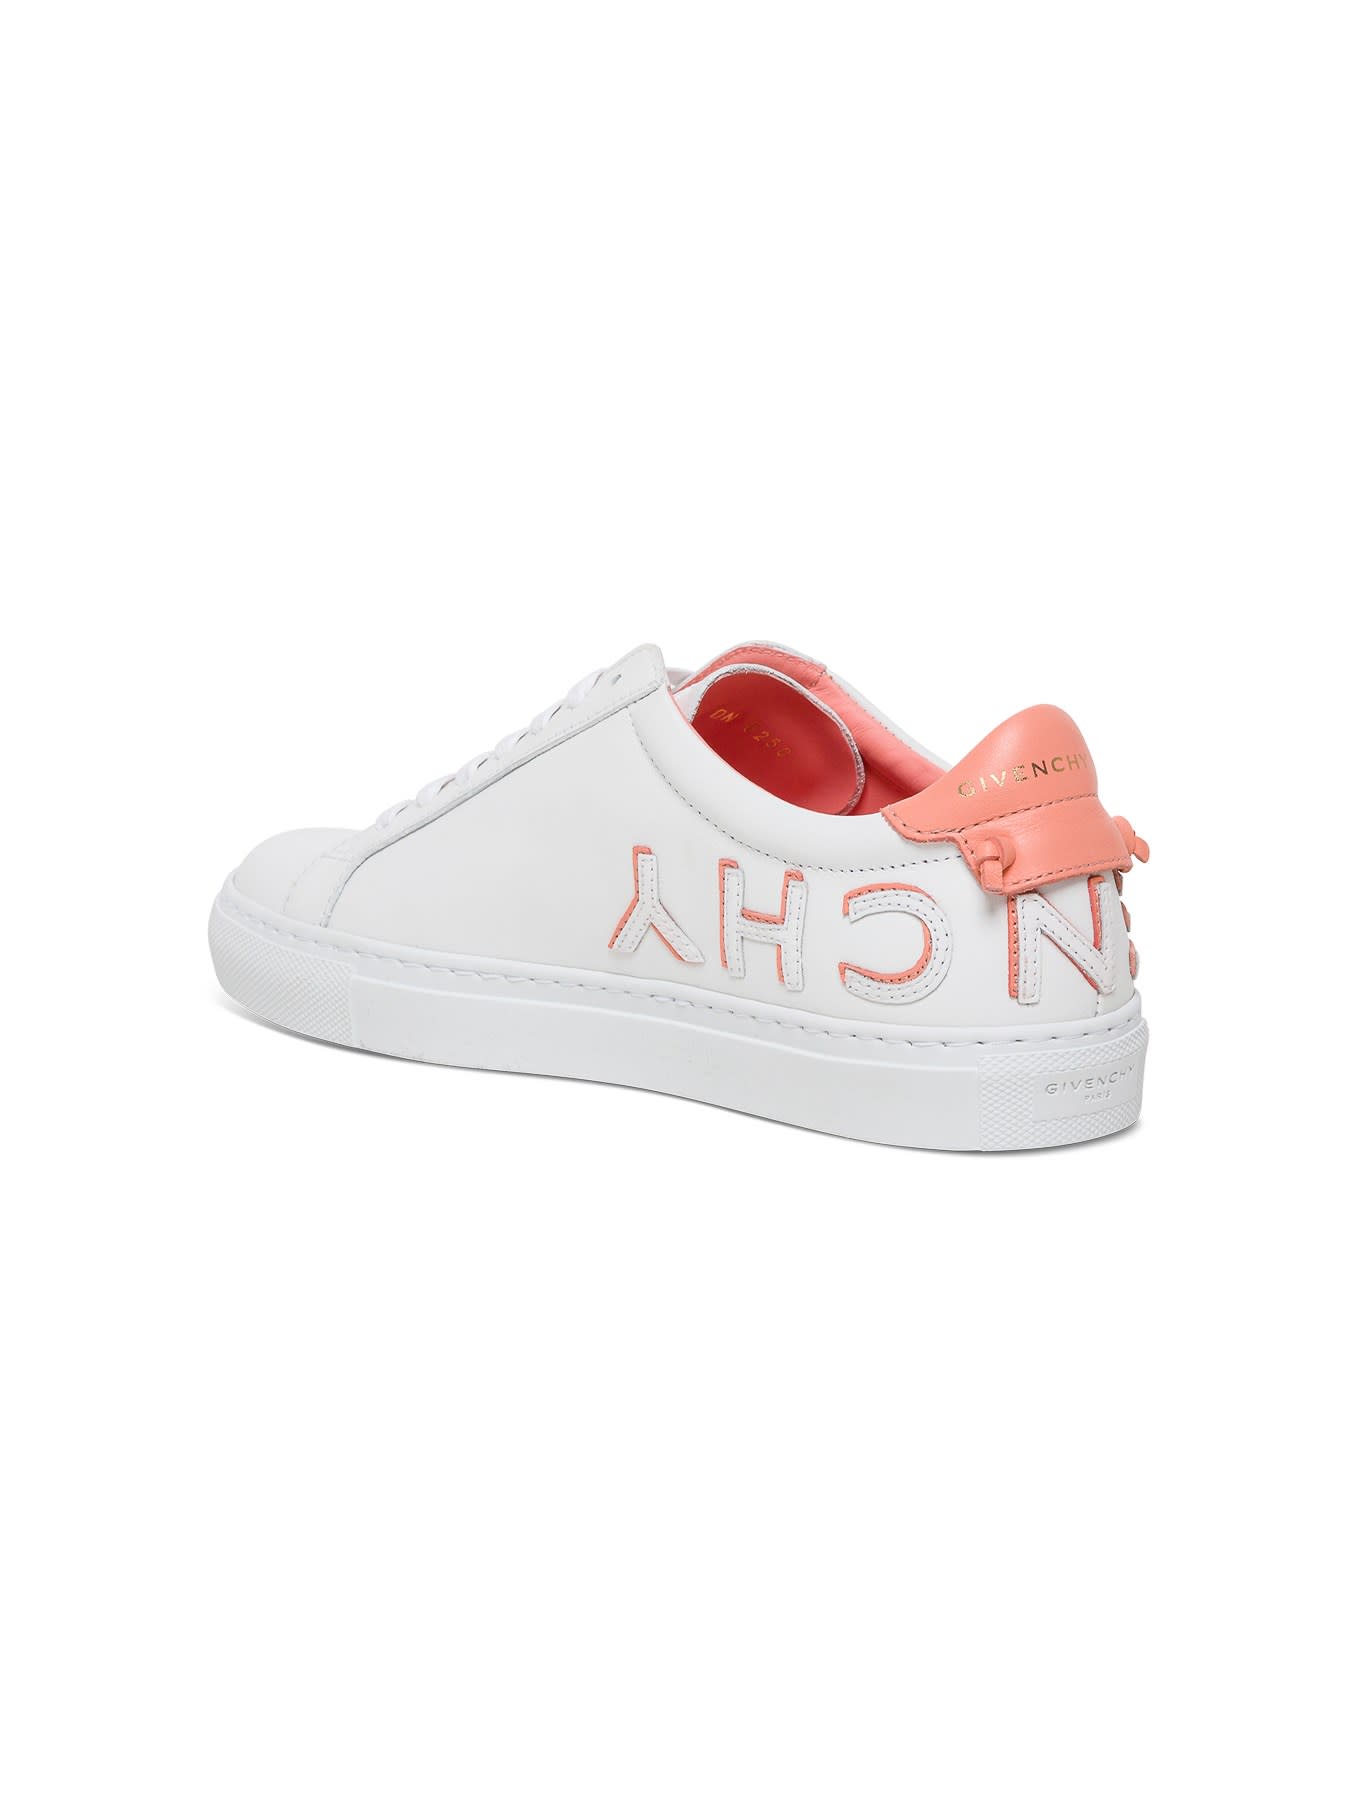 pink givenchy sneakers